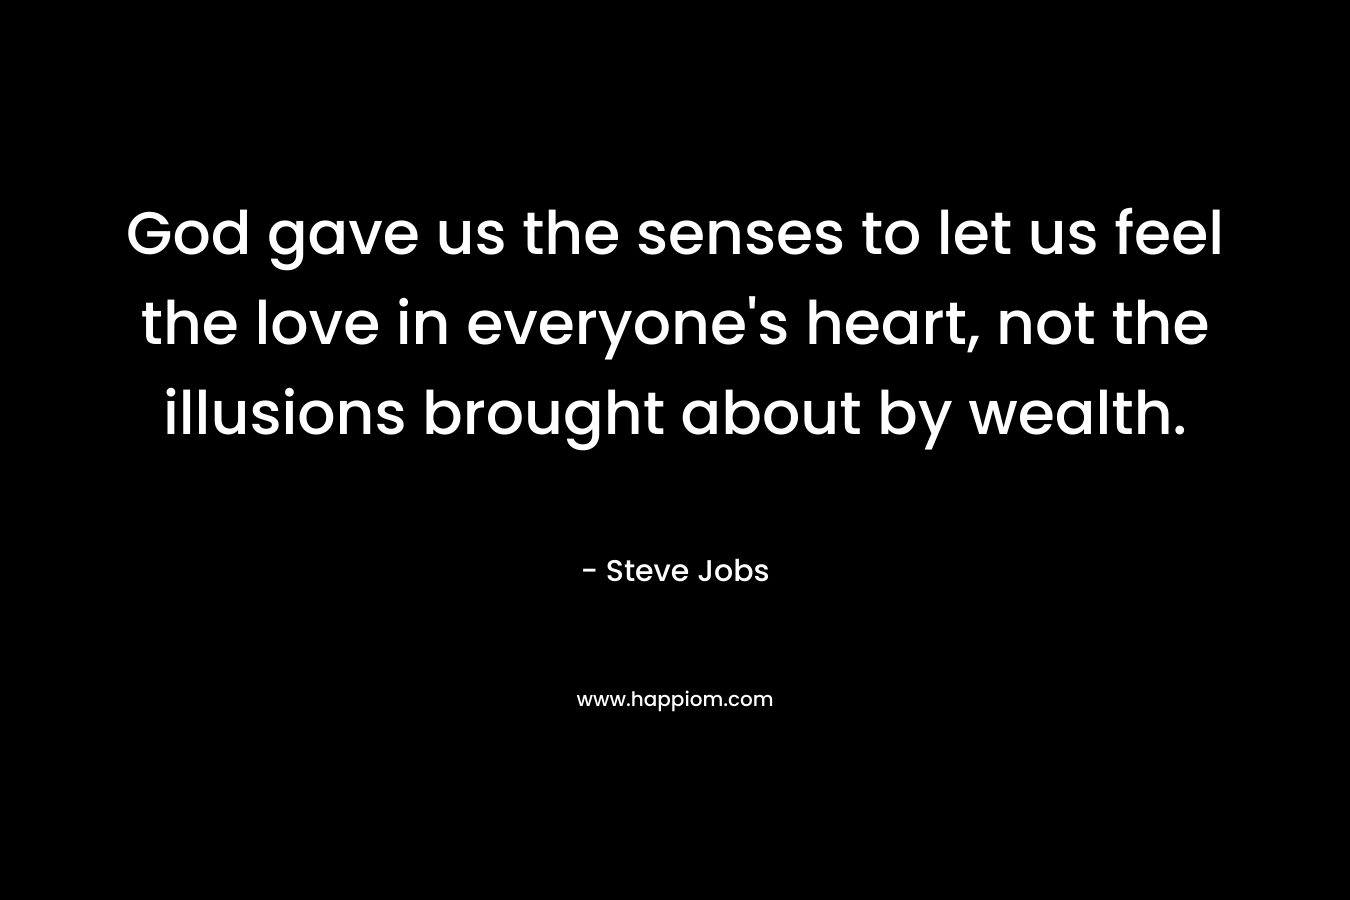 God gave us the senses to let us feel the love in everyone's heart, not the illusions brought about by wealth.